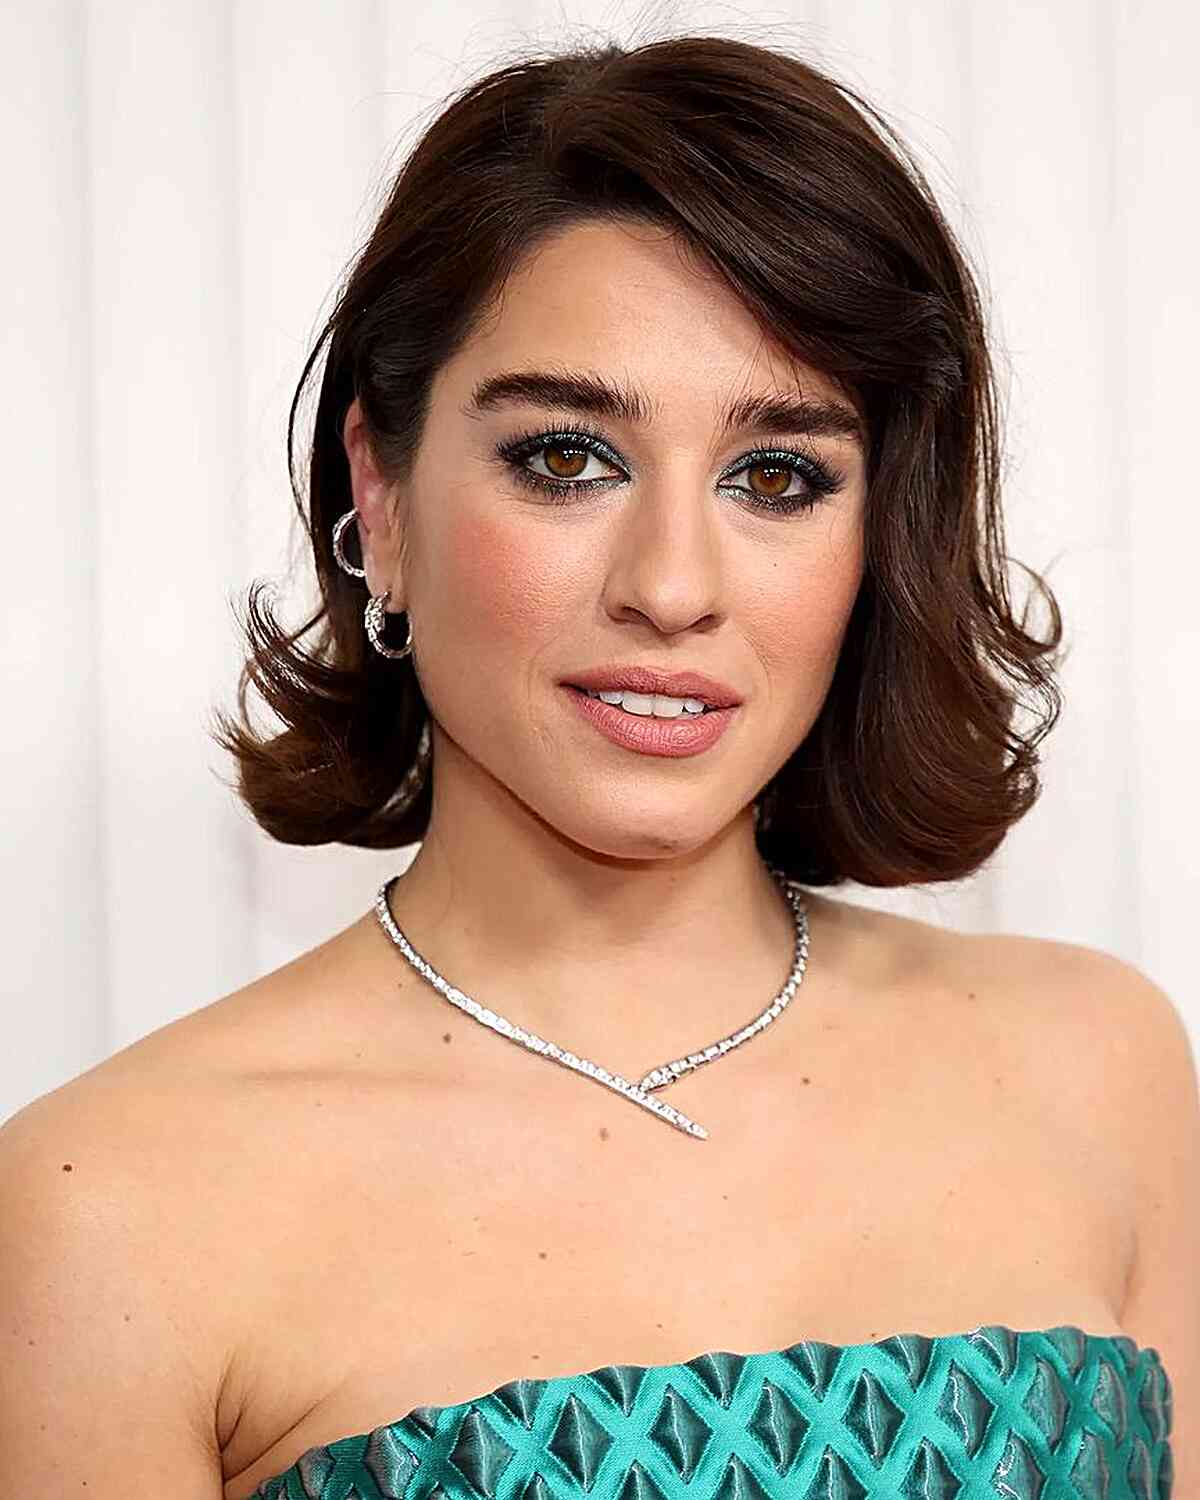 Above the Shoulder Neck-Length Italian Bob with Side Part